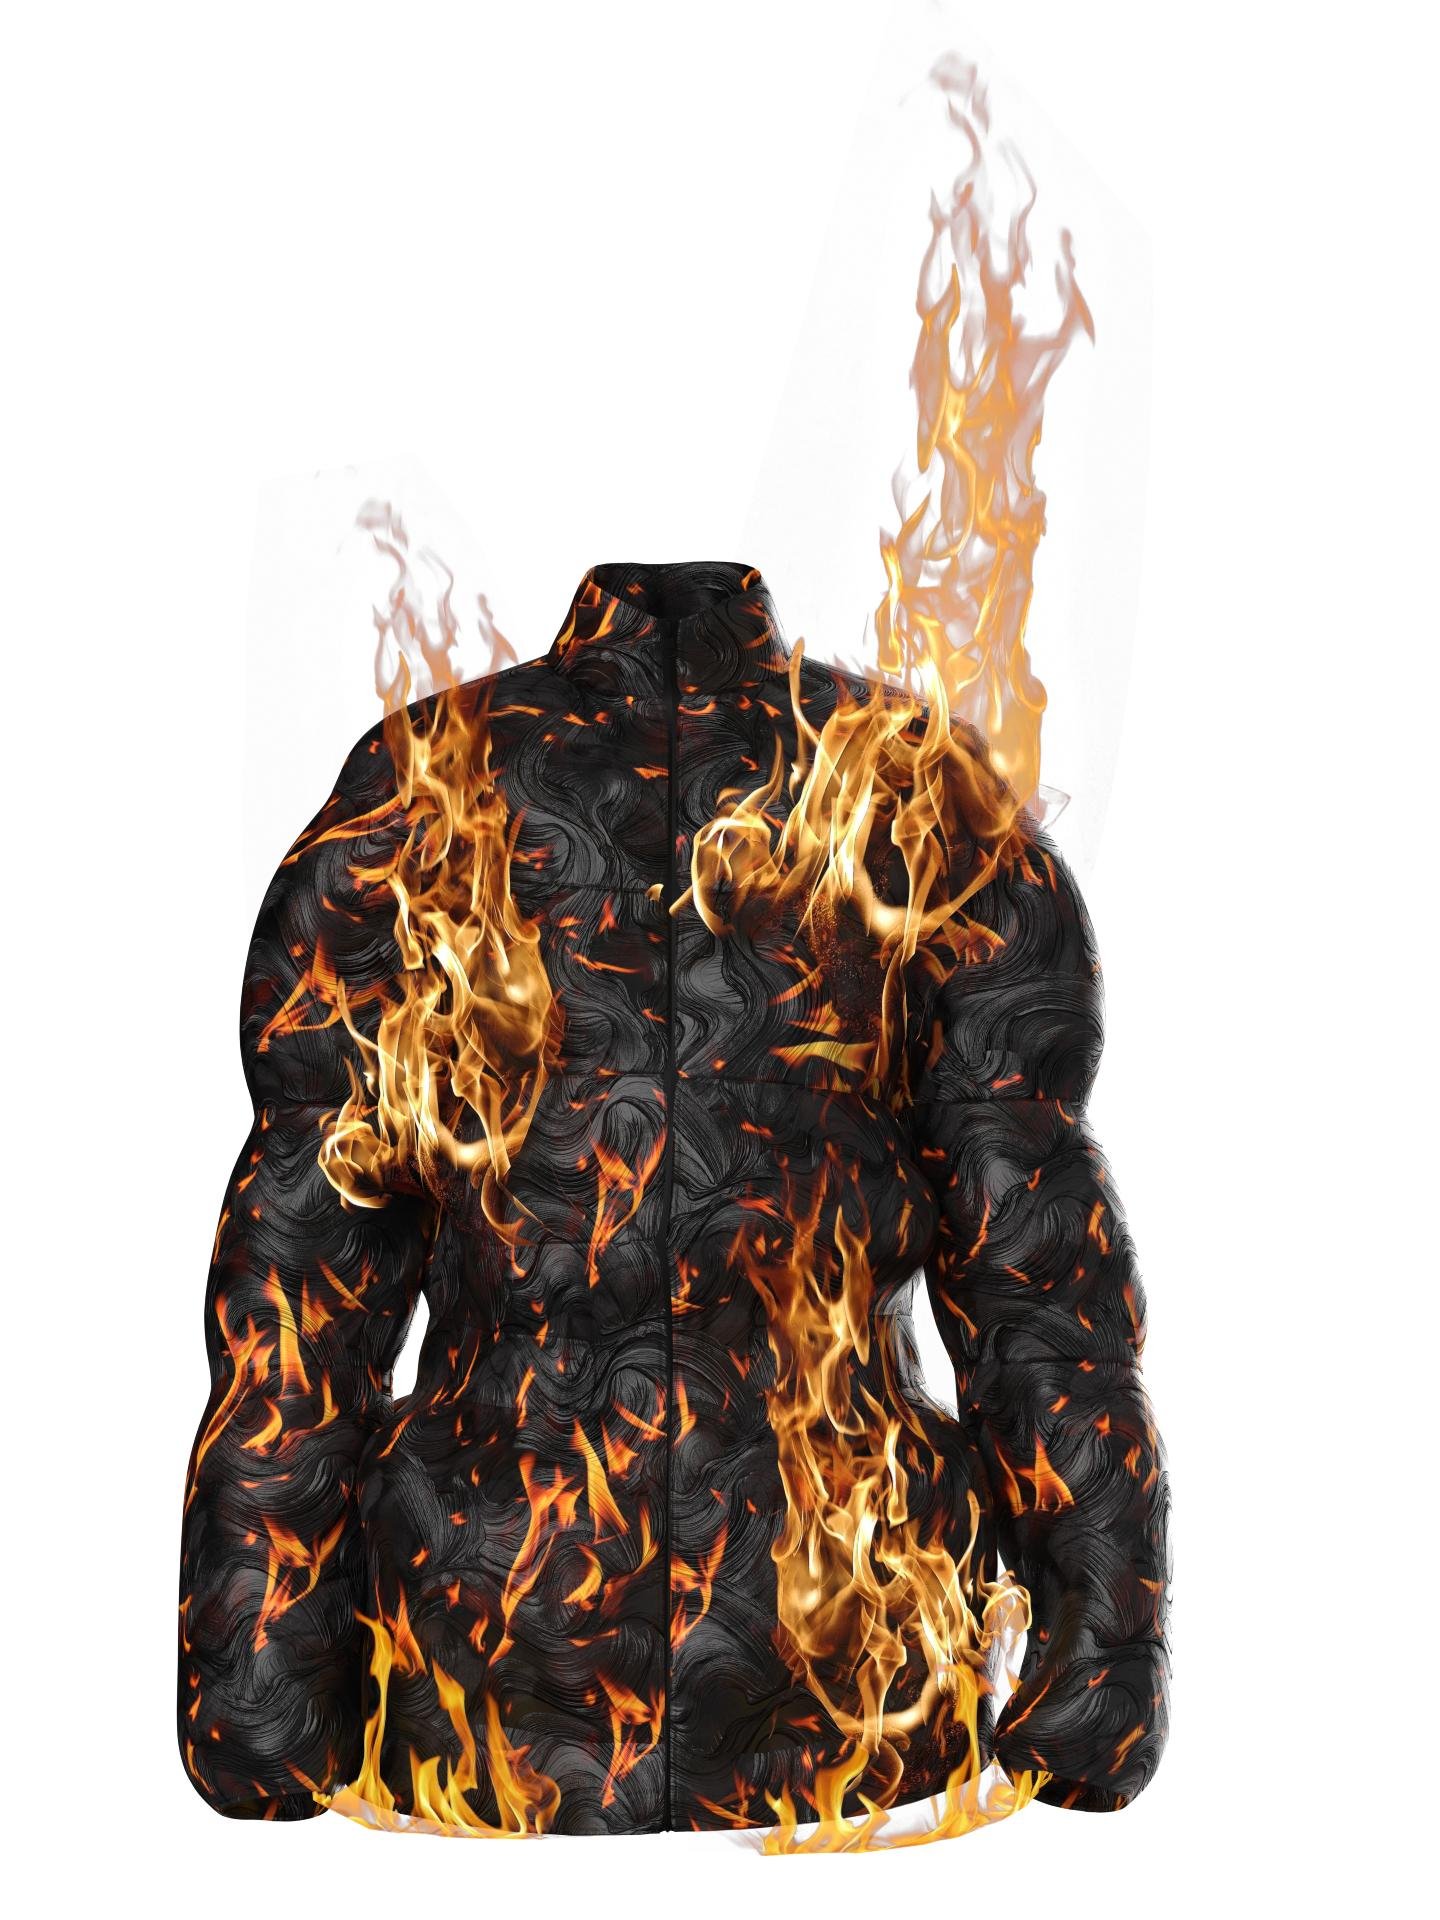 Ignition puffer jacket by SARA HASANPOUR